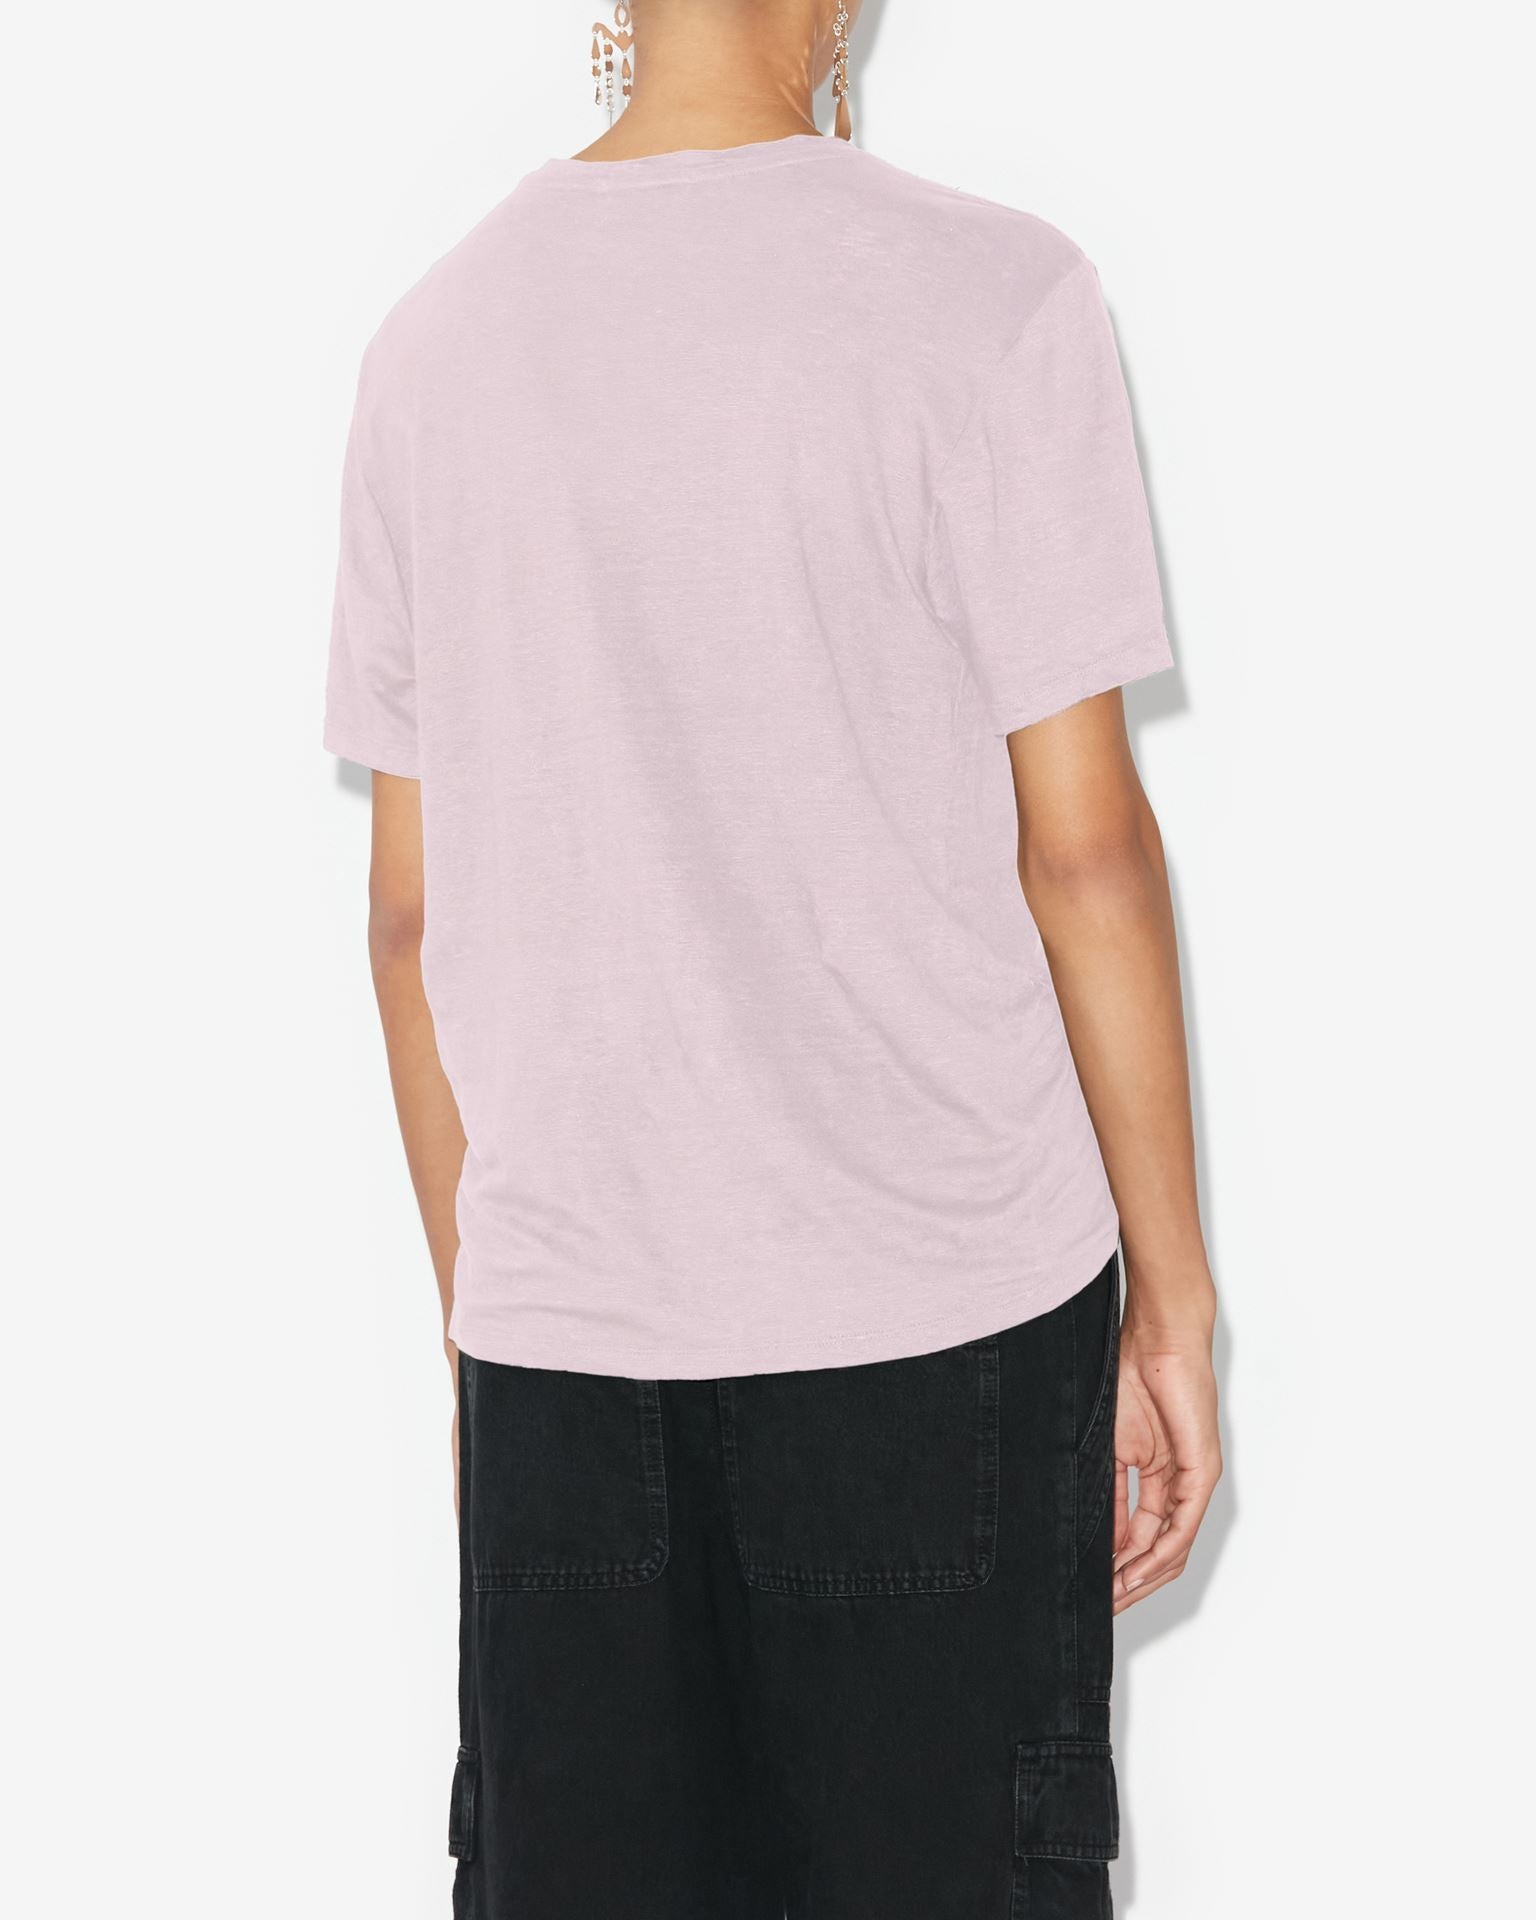 Zewel Tee Shirt in Pearl Rose and Silver